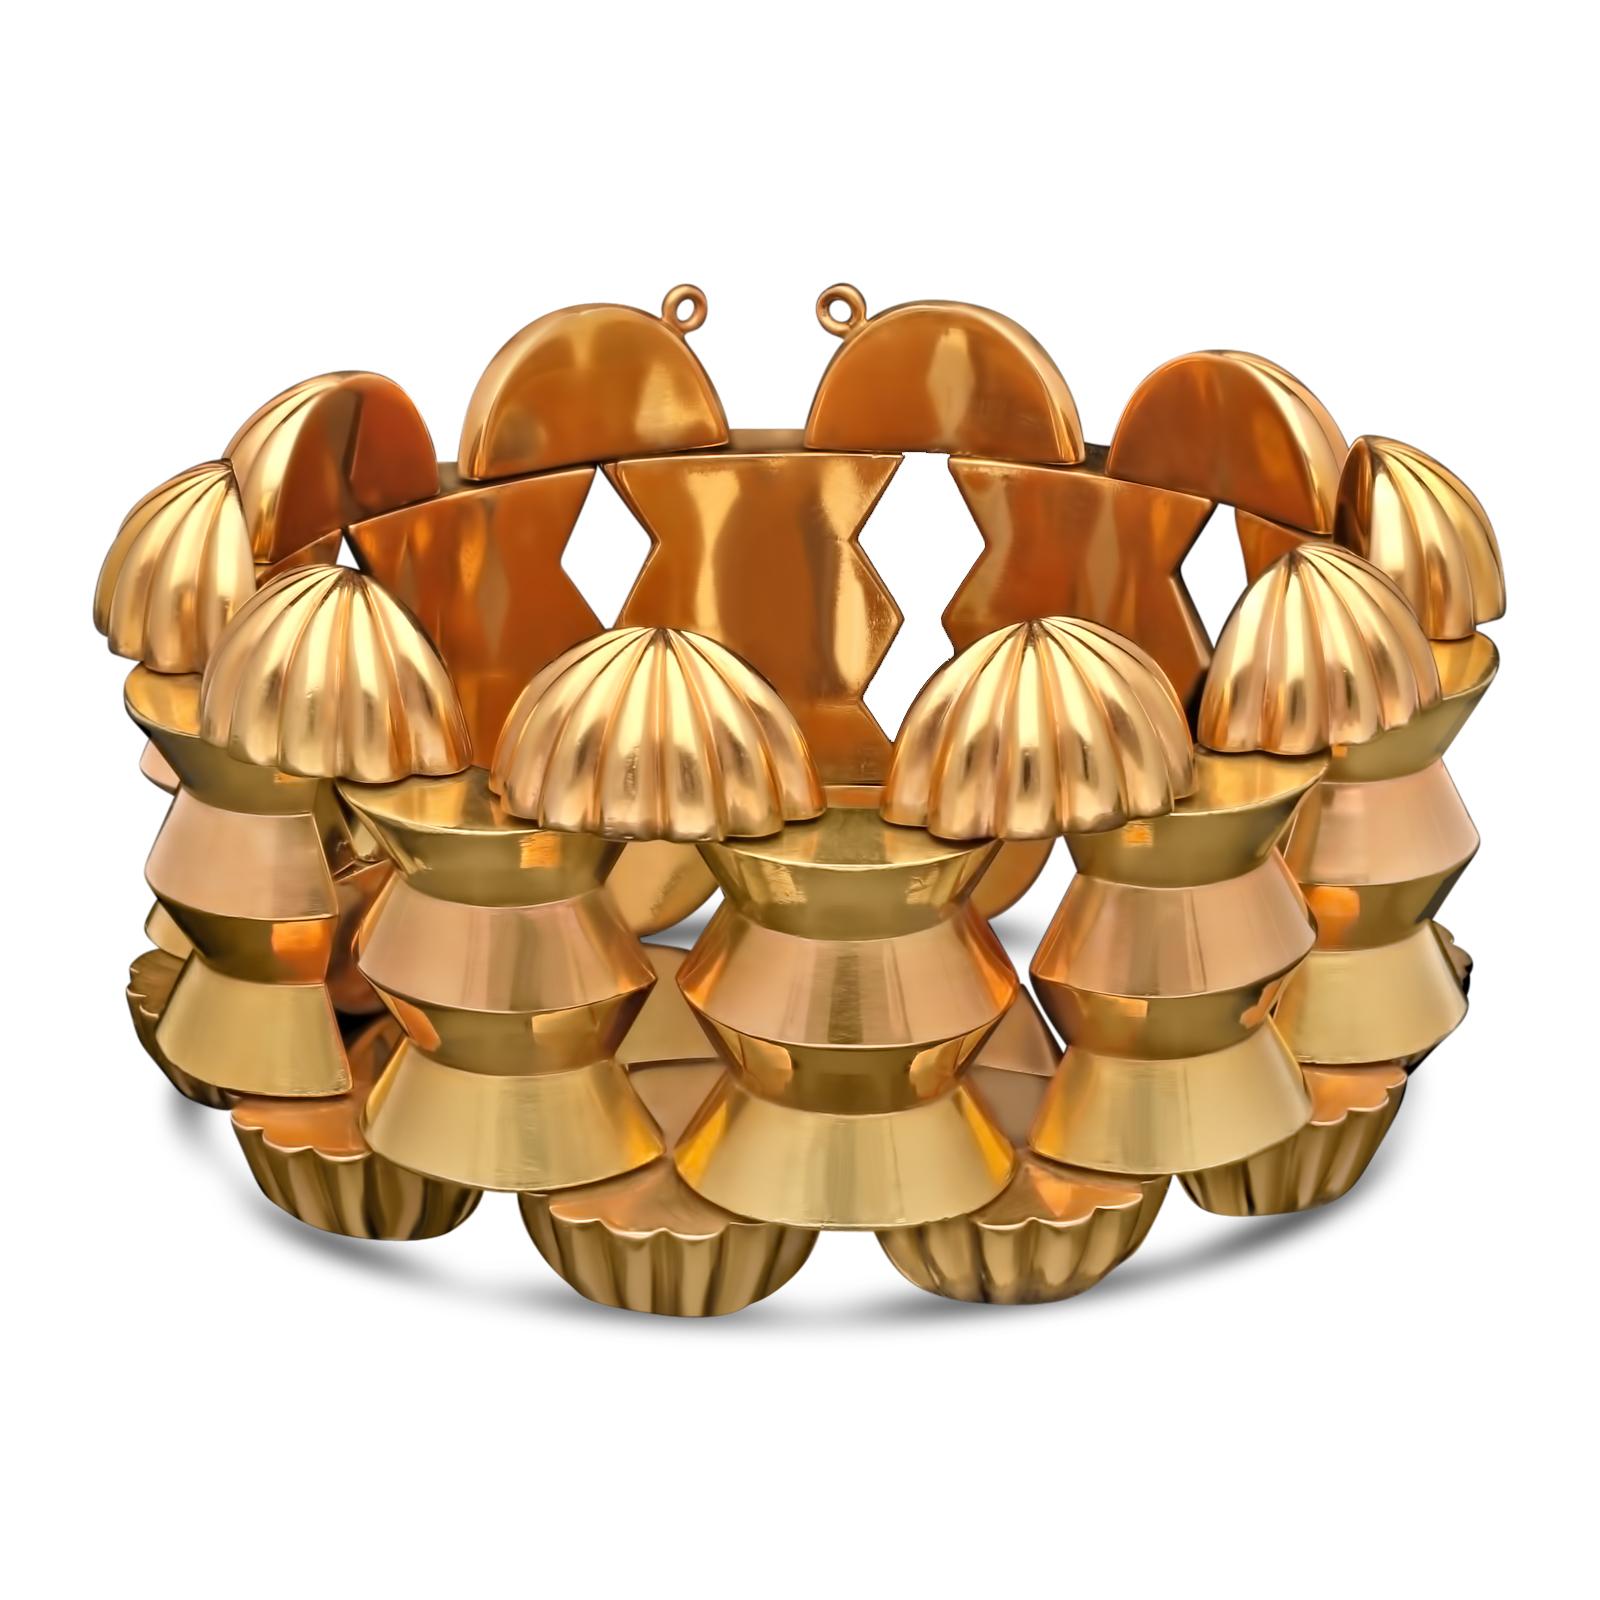 A bold and stylish two-tone gold Retro bracelet c.1940s designed as a wide band of 18ct yellow and rose gold geometric domed links borded each side by a row of rose gold half-dome fluted shell-like links, to a concealed tongue and box clasp.

21cm